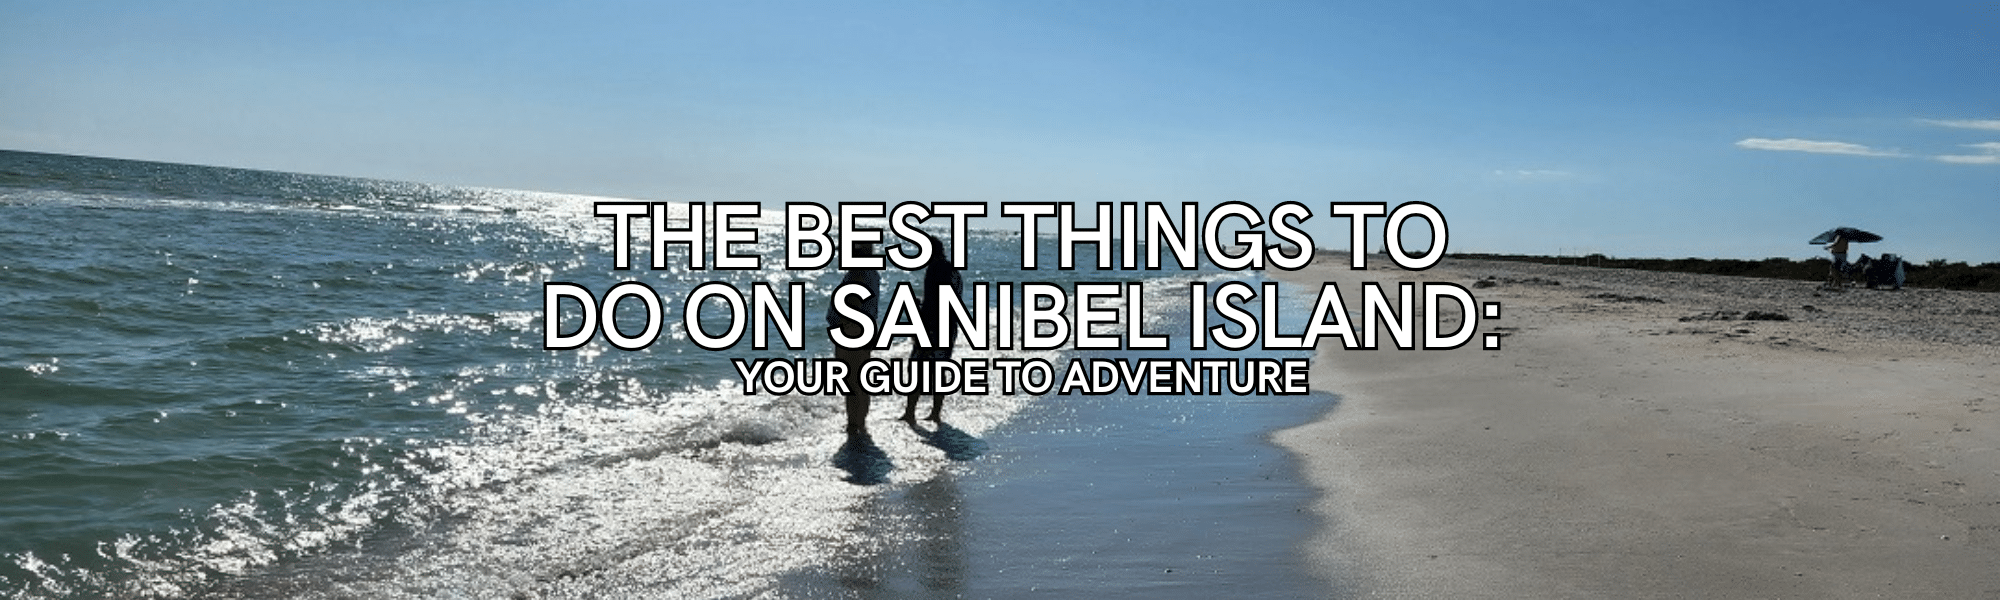 Best Things to do on Sanibel Island